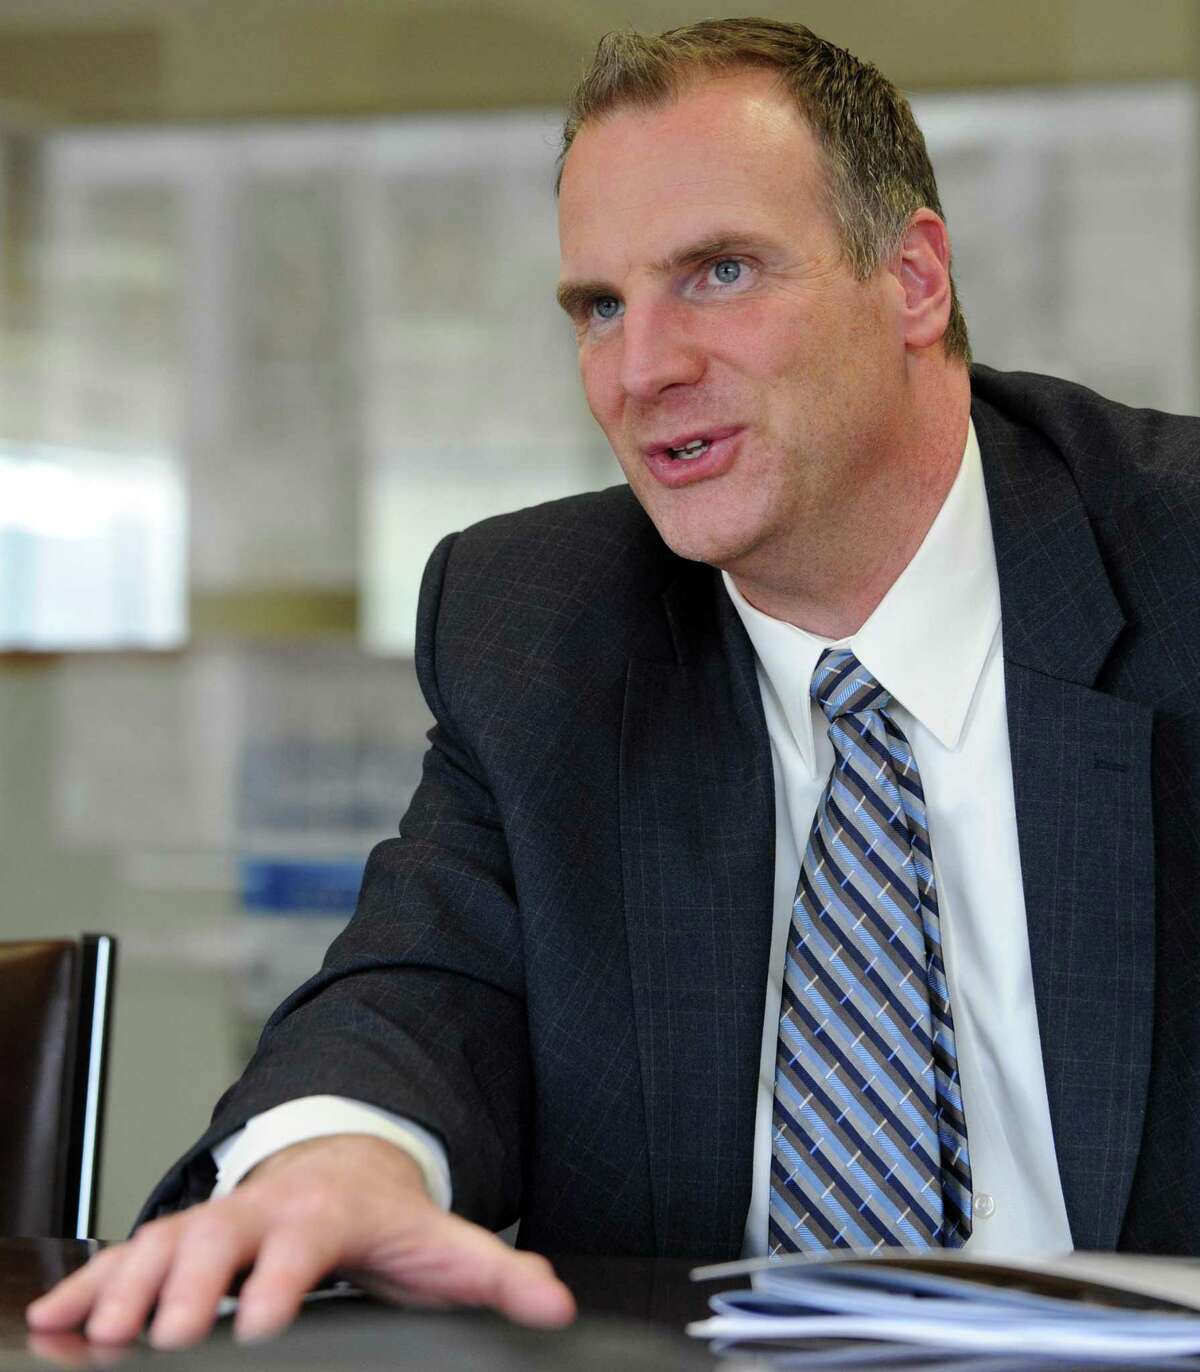 Joe DeLong, executive director of the Connecticut Conference of Municipalities, met with the Hearst Connecticut Media Editorial Board in 2016 in Bridgeport.